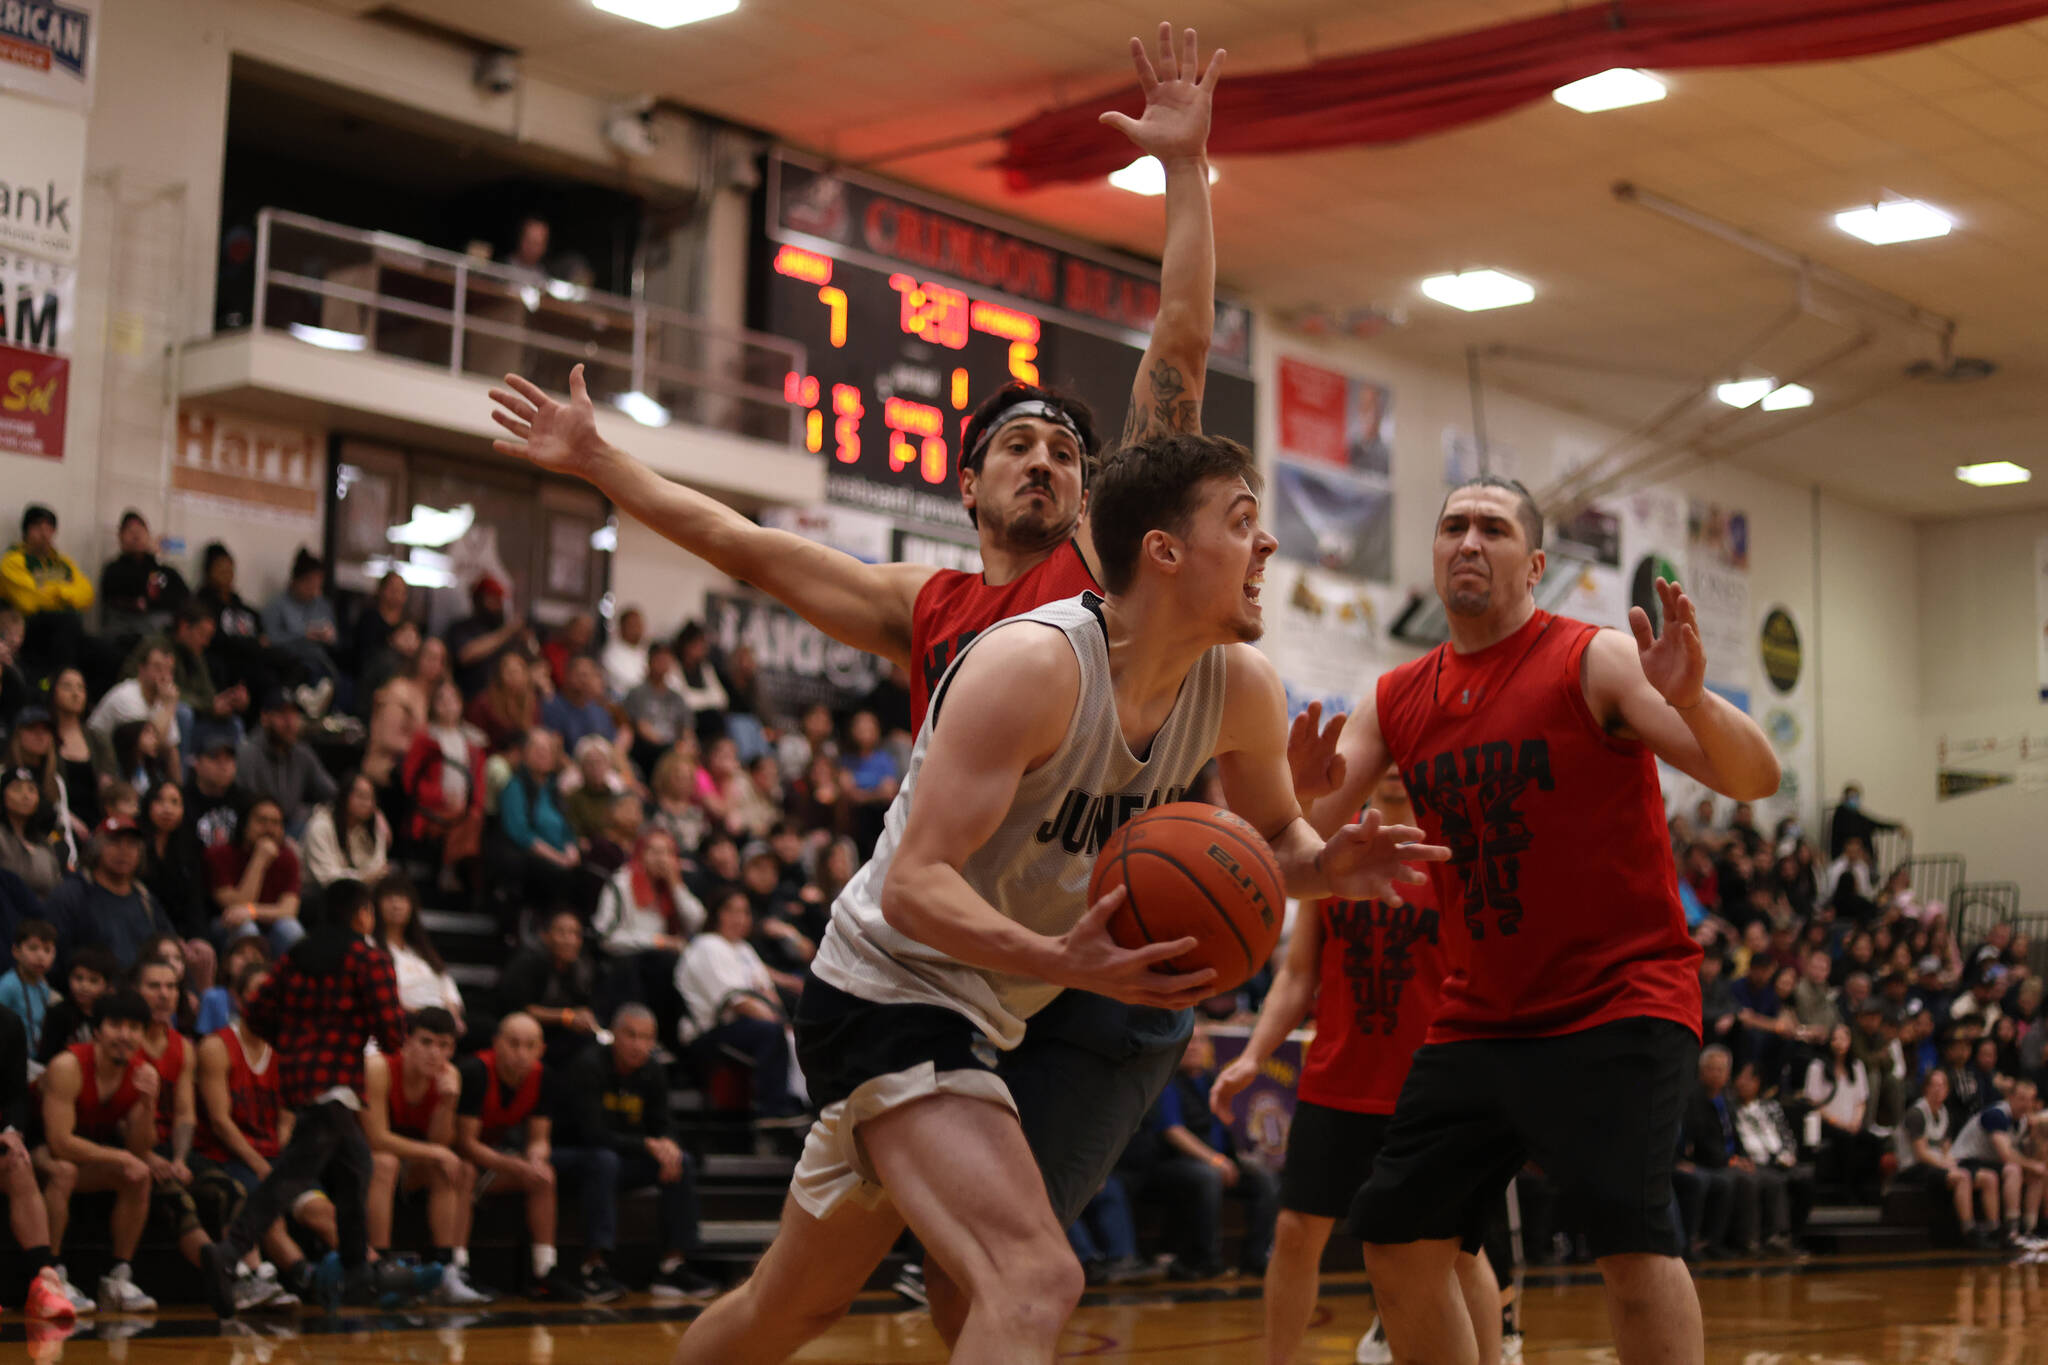 Juneau’s Kaleb Tompkins drives toward the basket while defended by Hydaburg’s Claude Young and George Peratrovich in the first quarter of Juneau’s eventual Juneau Lions Club 74th Gold Medal Tournament B Bracket championship. Tompkins took home B Bracket MVP honors following the Saturday night game. (Ben Hohenstatt / Juneau Empire)